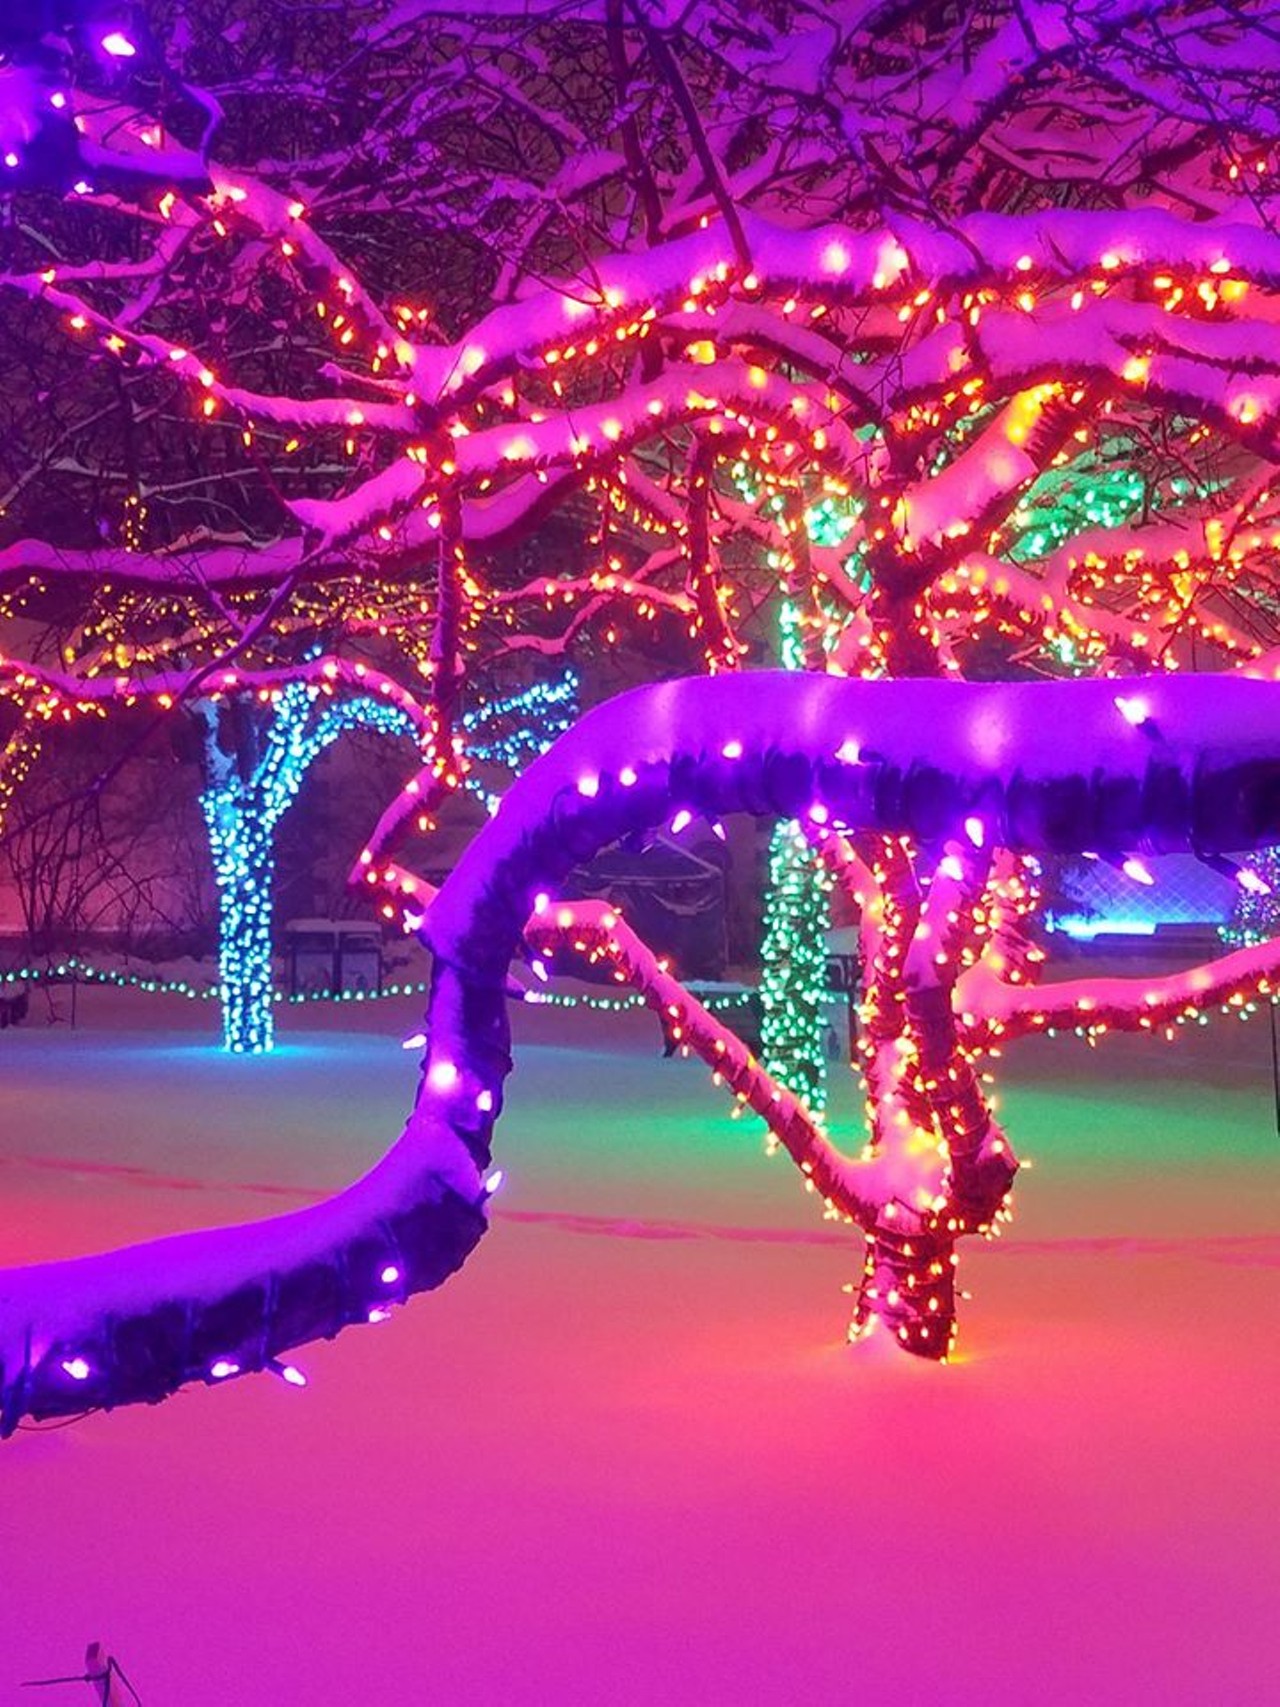 Wild Lights
8450 W. 10 Mile Rd., Royal Oak; 248-541-5717
Five million LED lights will illuminate trees, buildings, and more than 230 animal sculptures inside the Detroit Zoo this holiday season. This event is from 5:30 p.m. to 9 p.m. on select weeknights, and 5:30 p.m. to 10 p.m. on Fridays and Saturdays. The event runs until the end of December.
Photo via Facebook